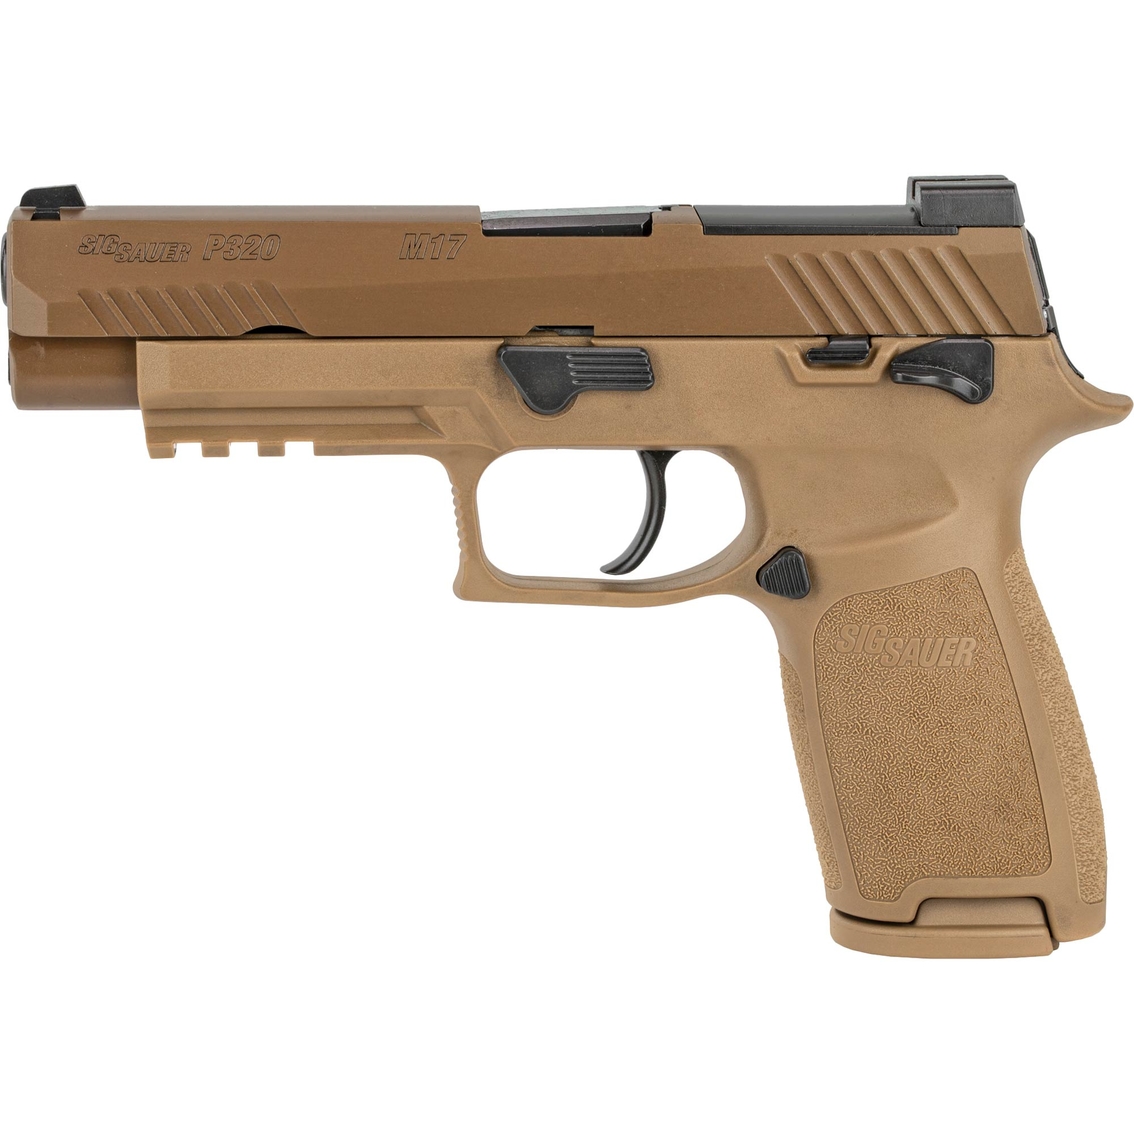 Sig Sauer P320 M17 9MM 4.7 in. Barrel 17 Rds Pistol Brown with Thumb Safety - Image 2 of 3